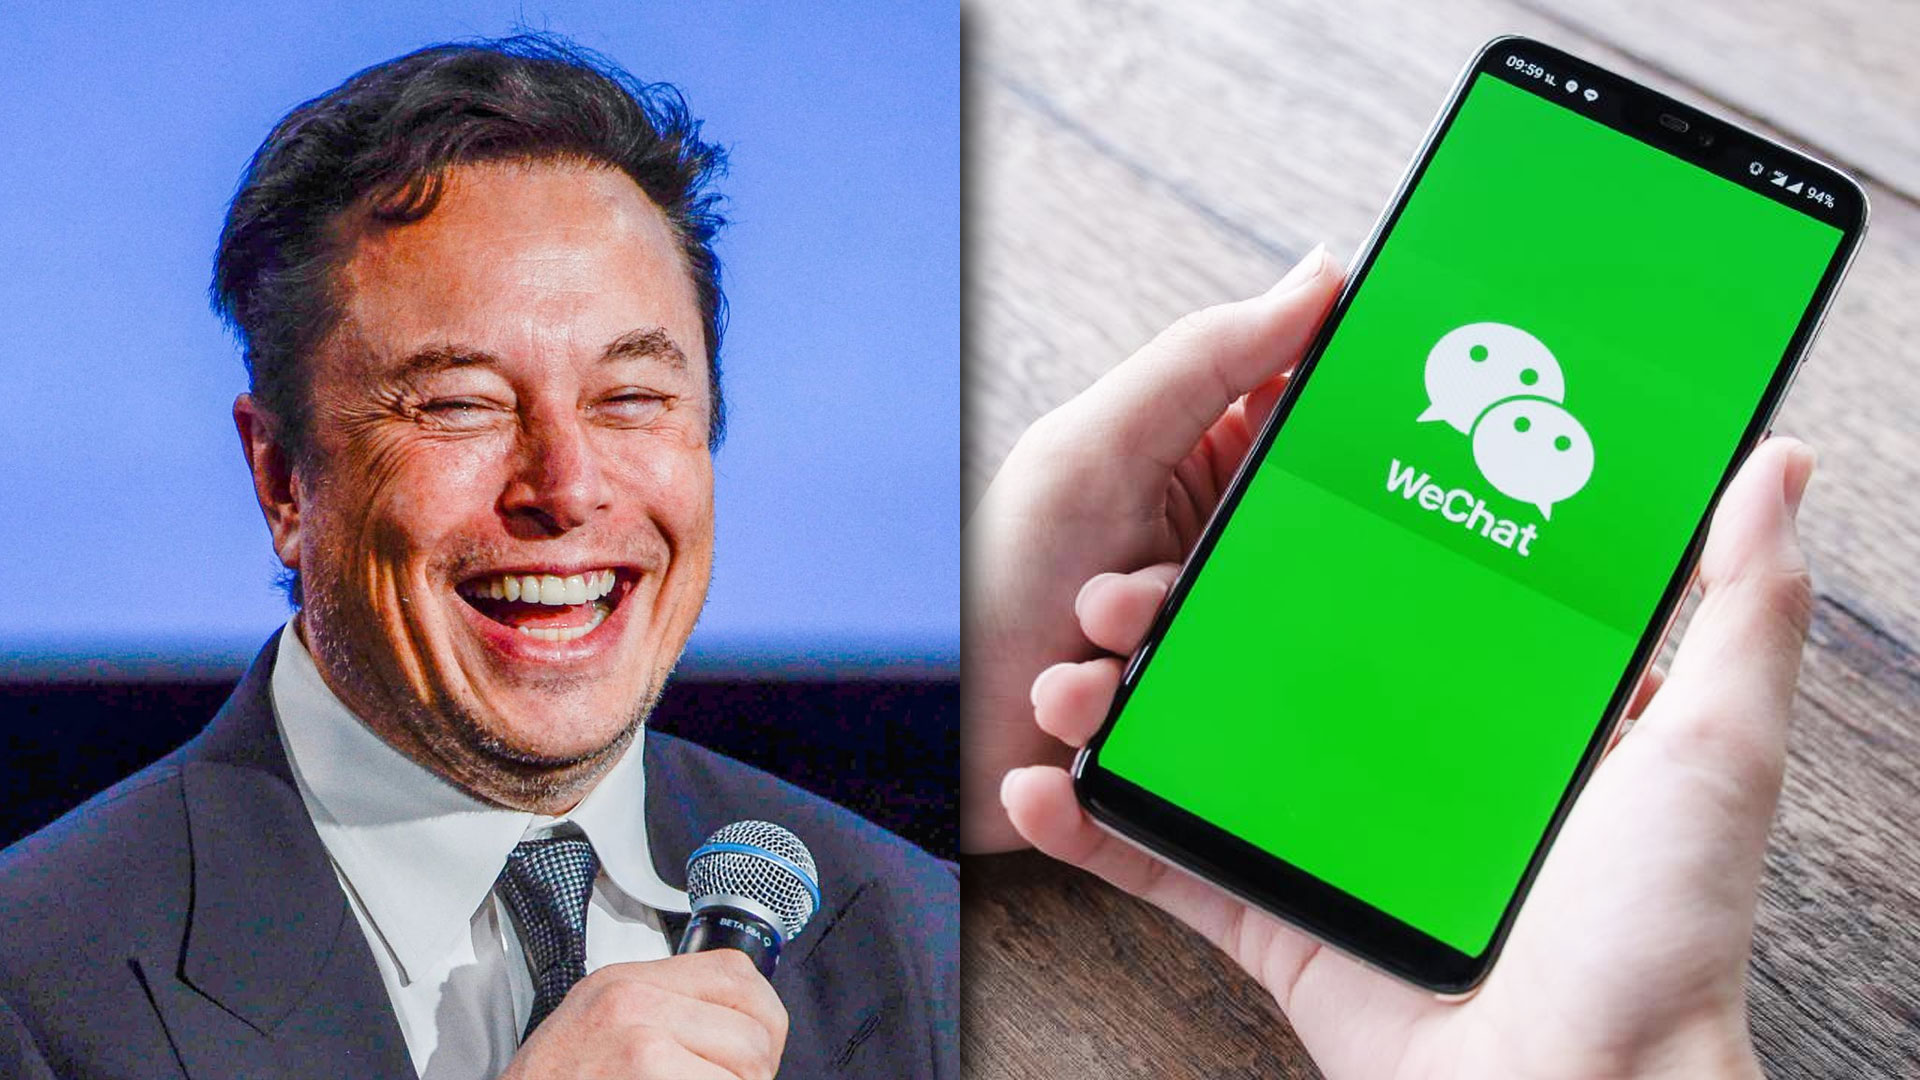 X as WeChat: what is the "super app" that Elon Musk wants - GizChina.it